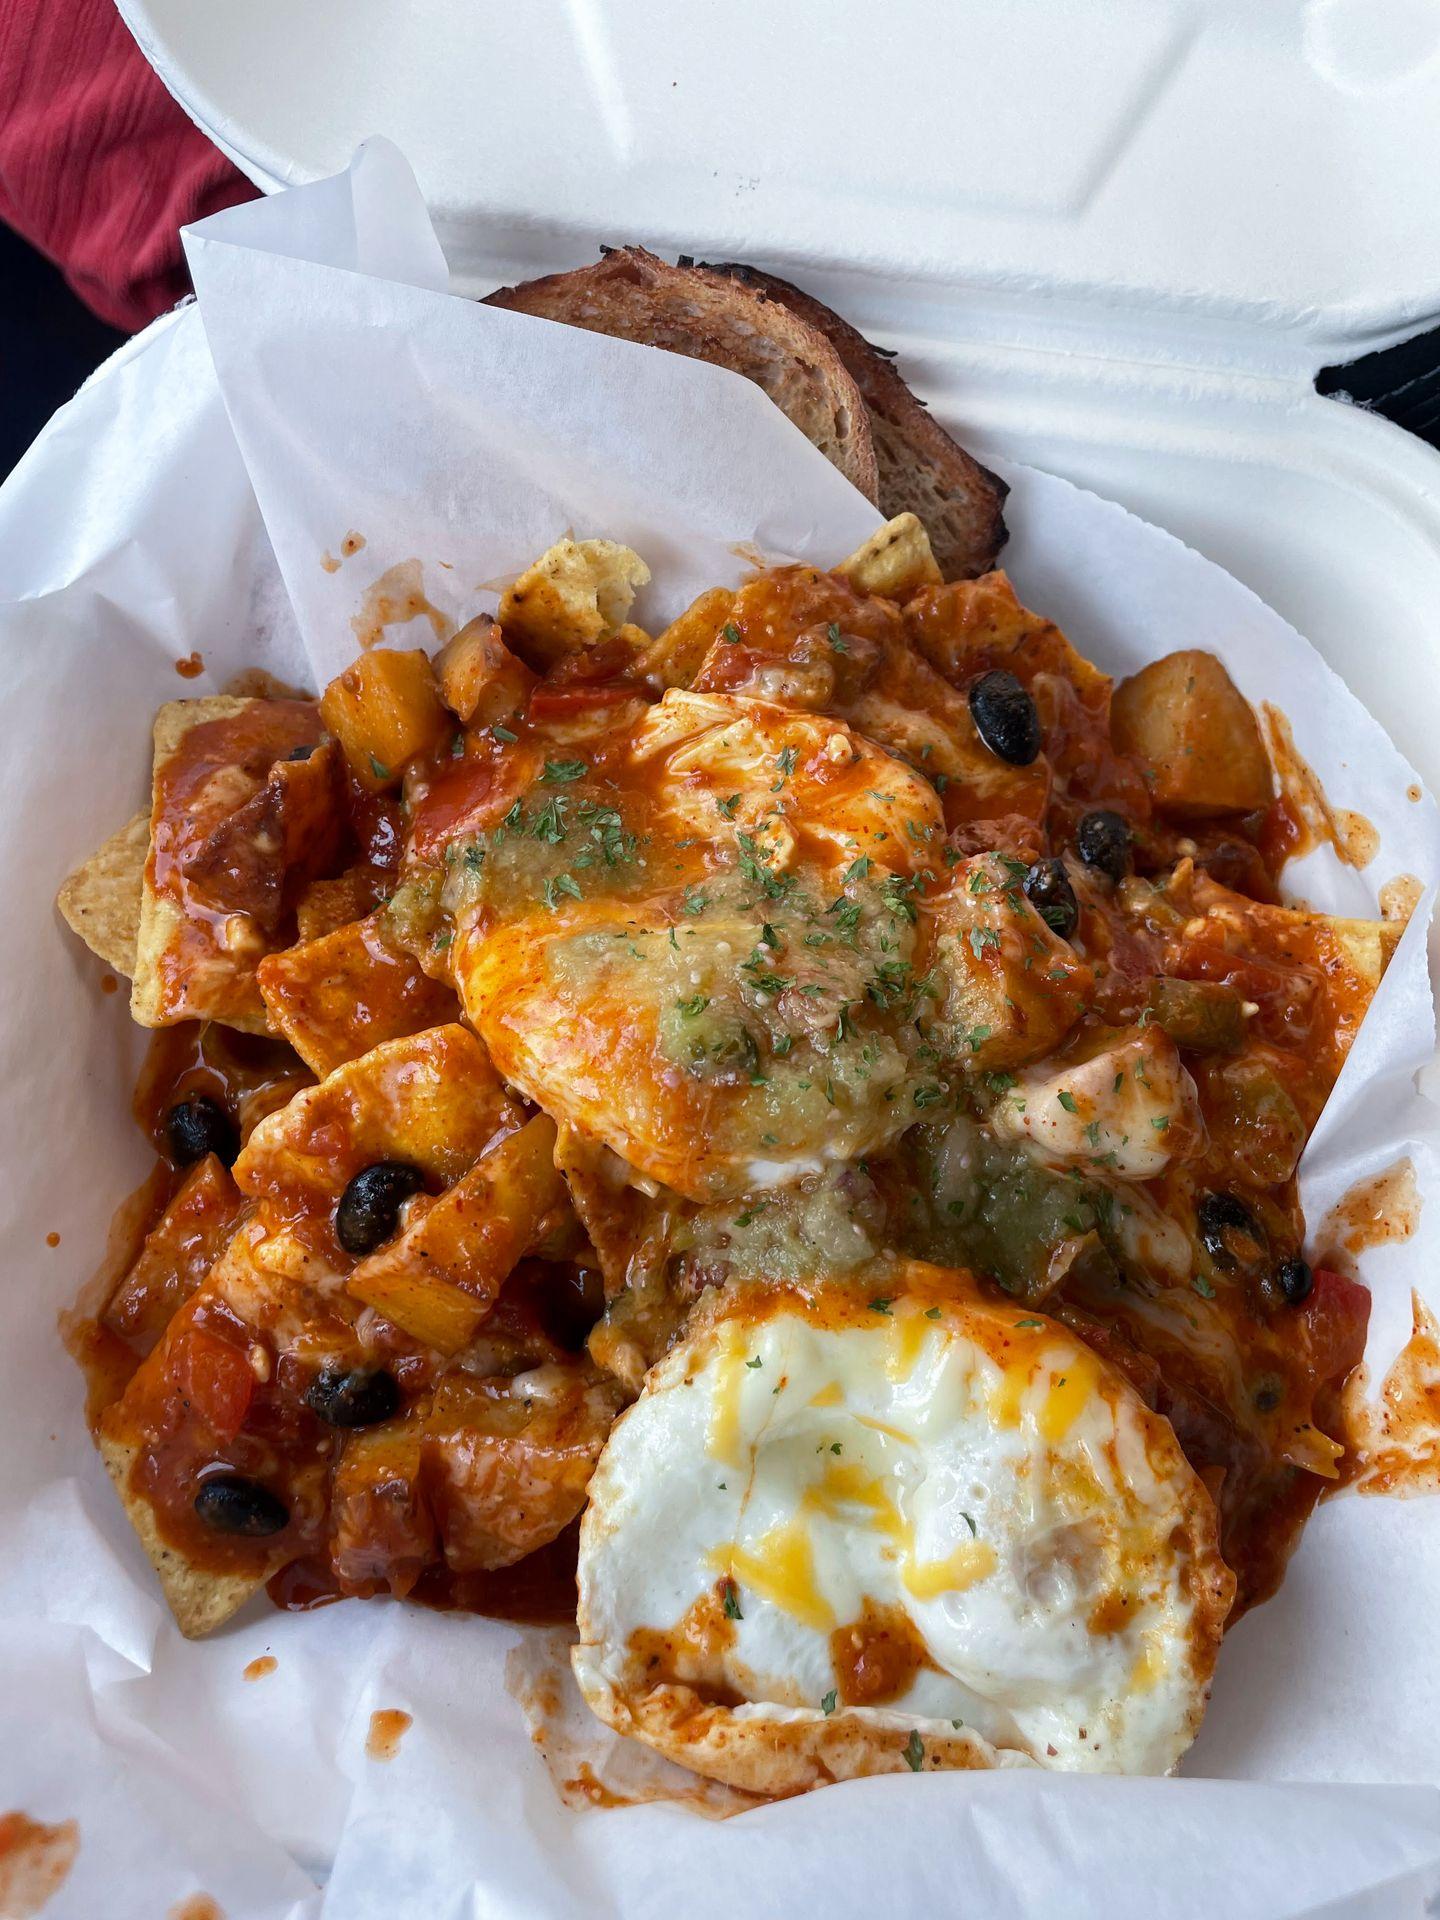 A plate of migas with sourdough toast in a to-go box from Stanley Baking Company & Café.